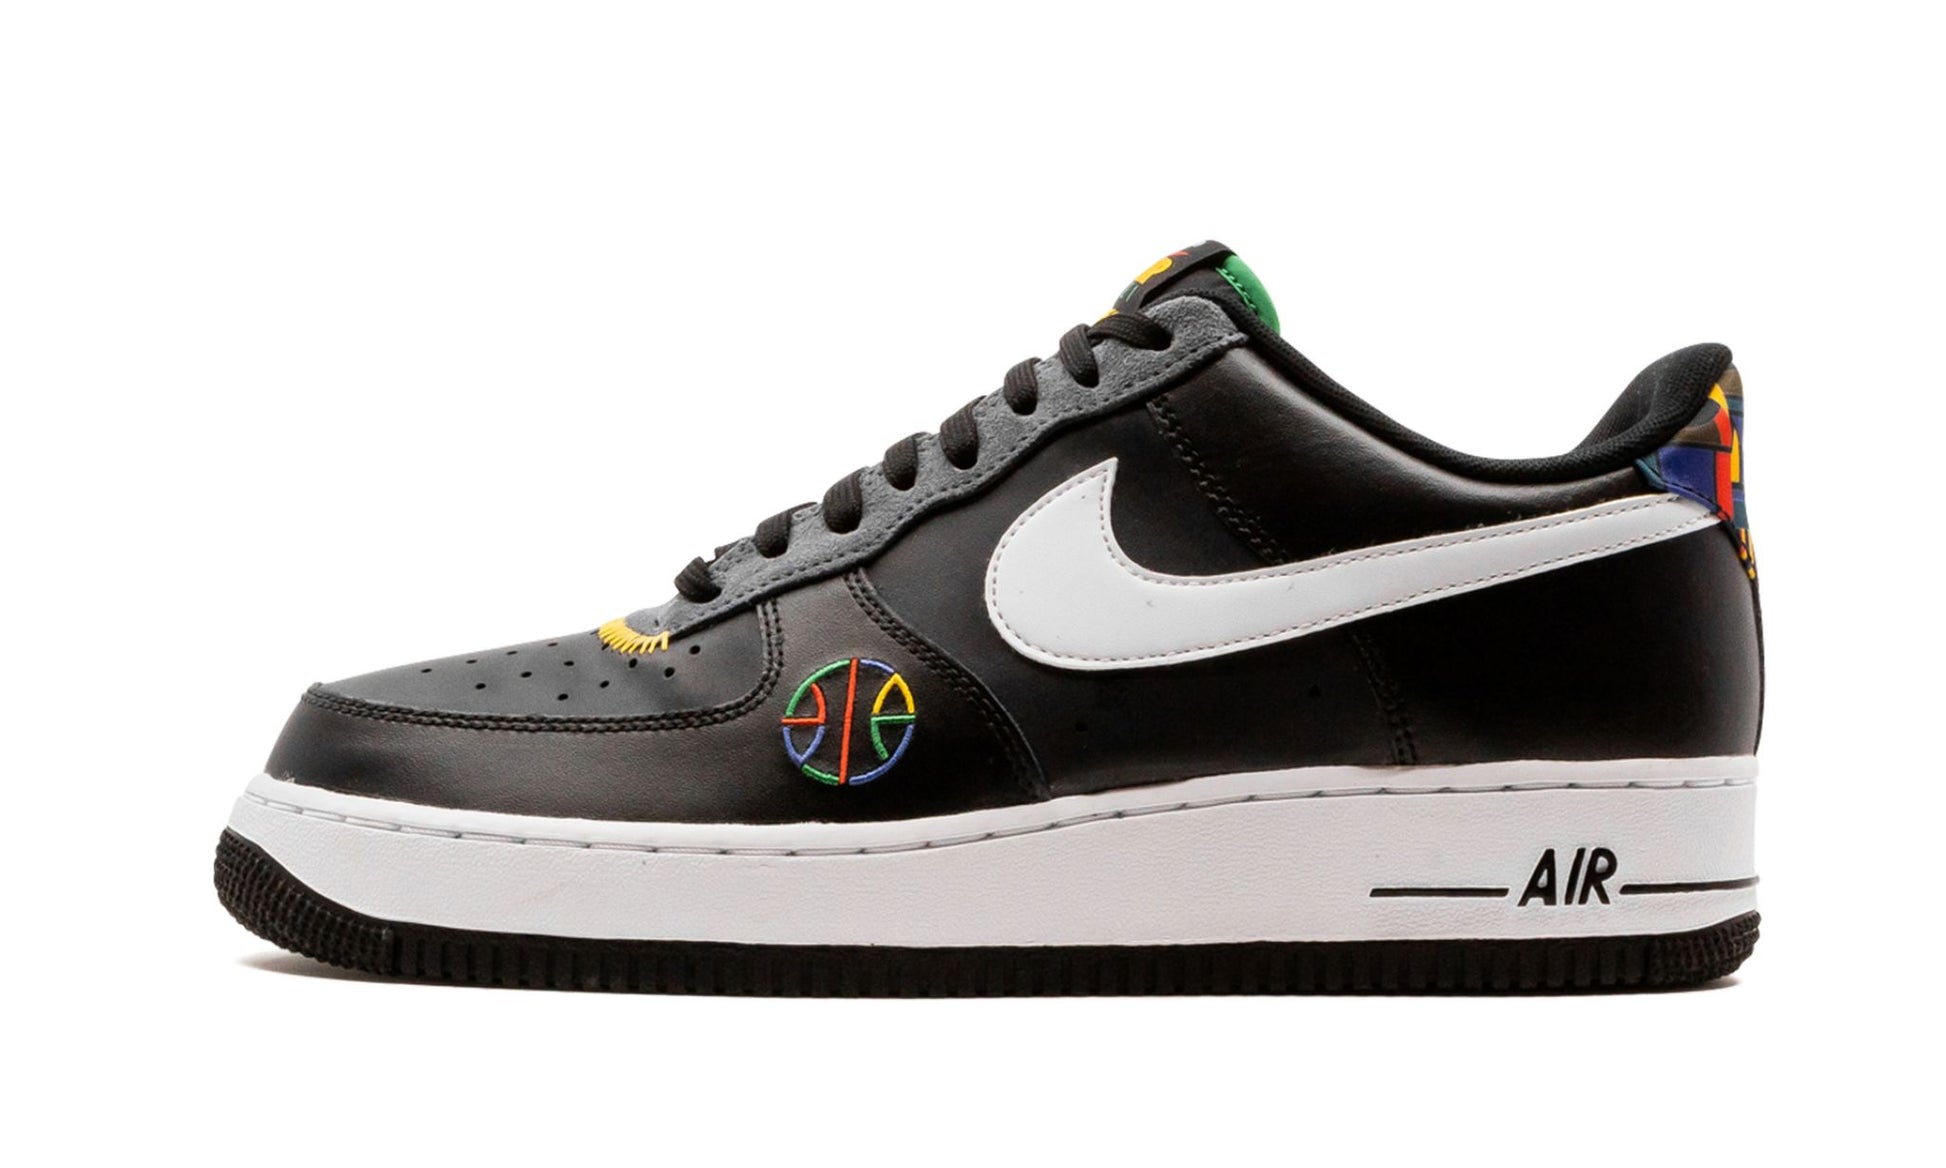 Air Force 1 Low '07 LV8 "Live Together, Play Together"